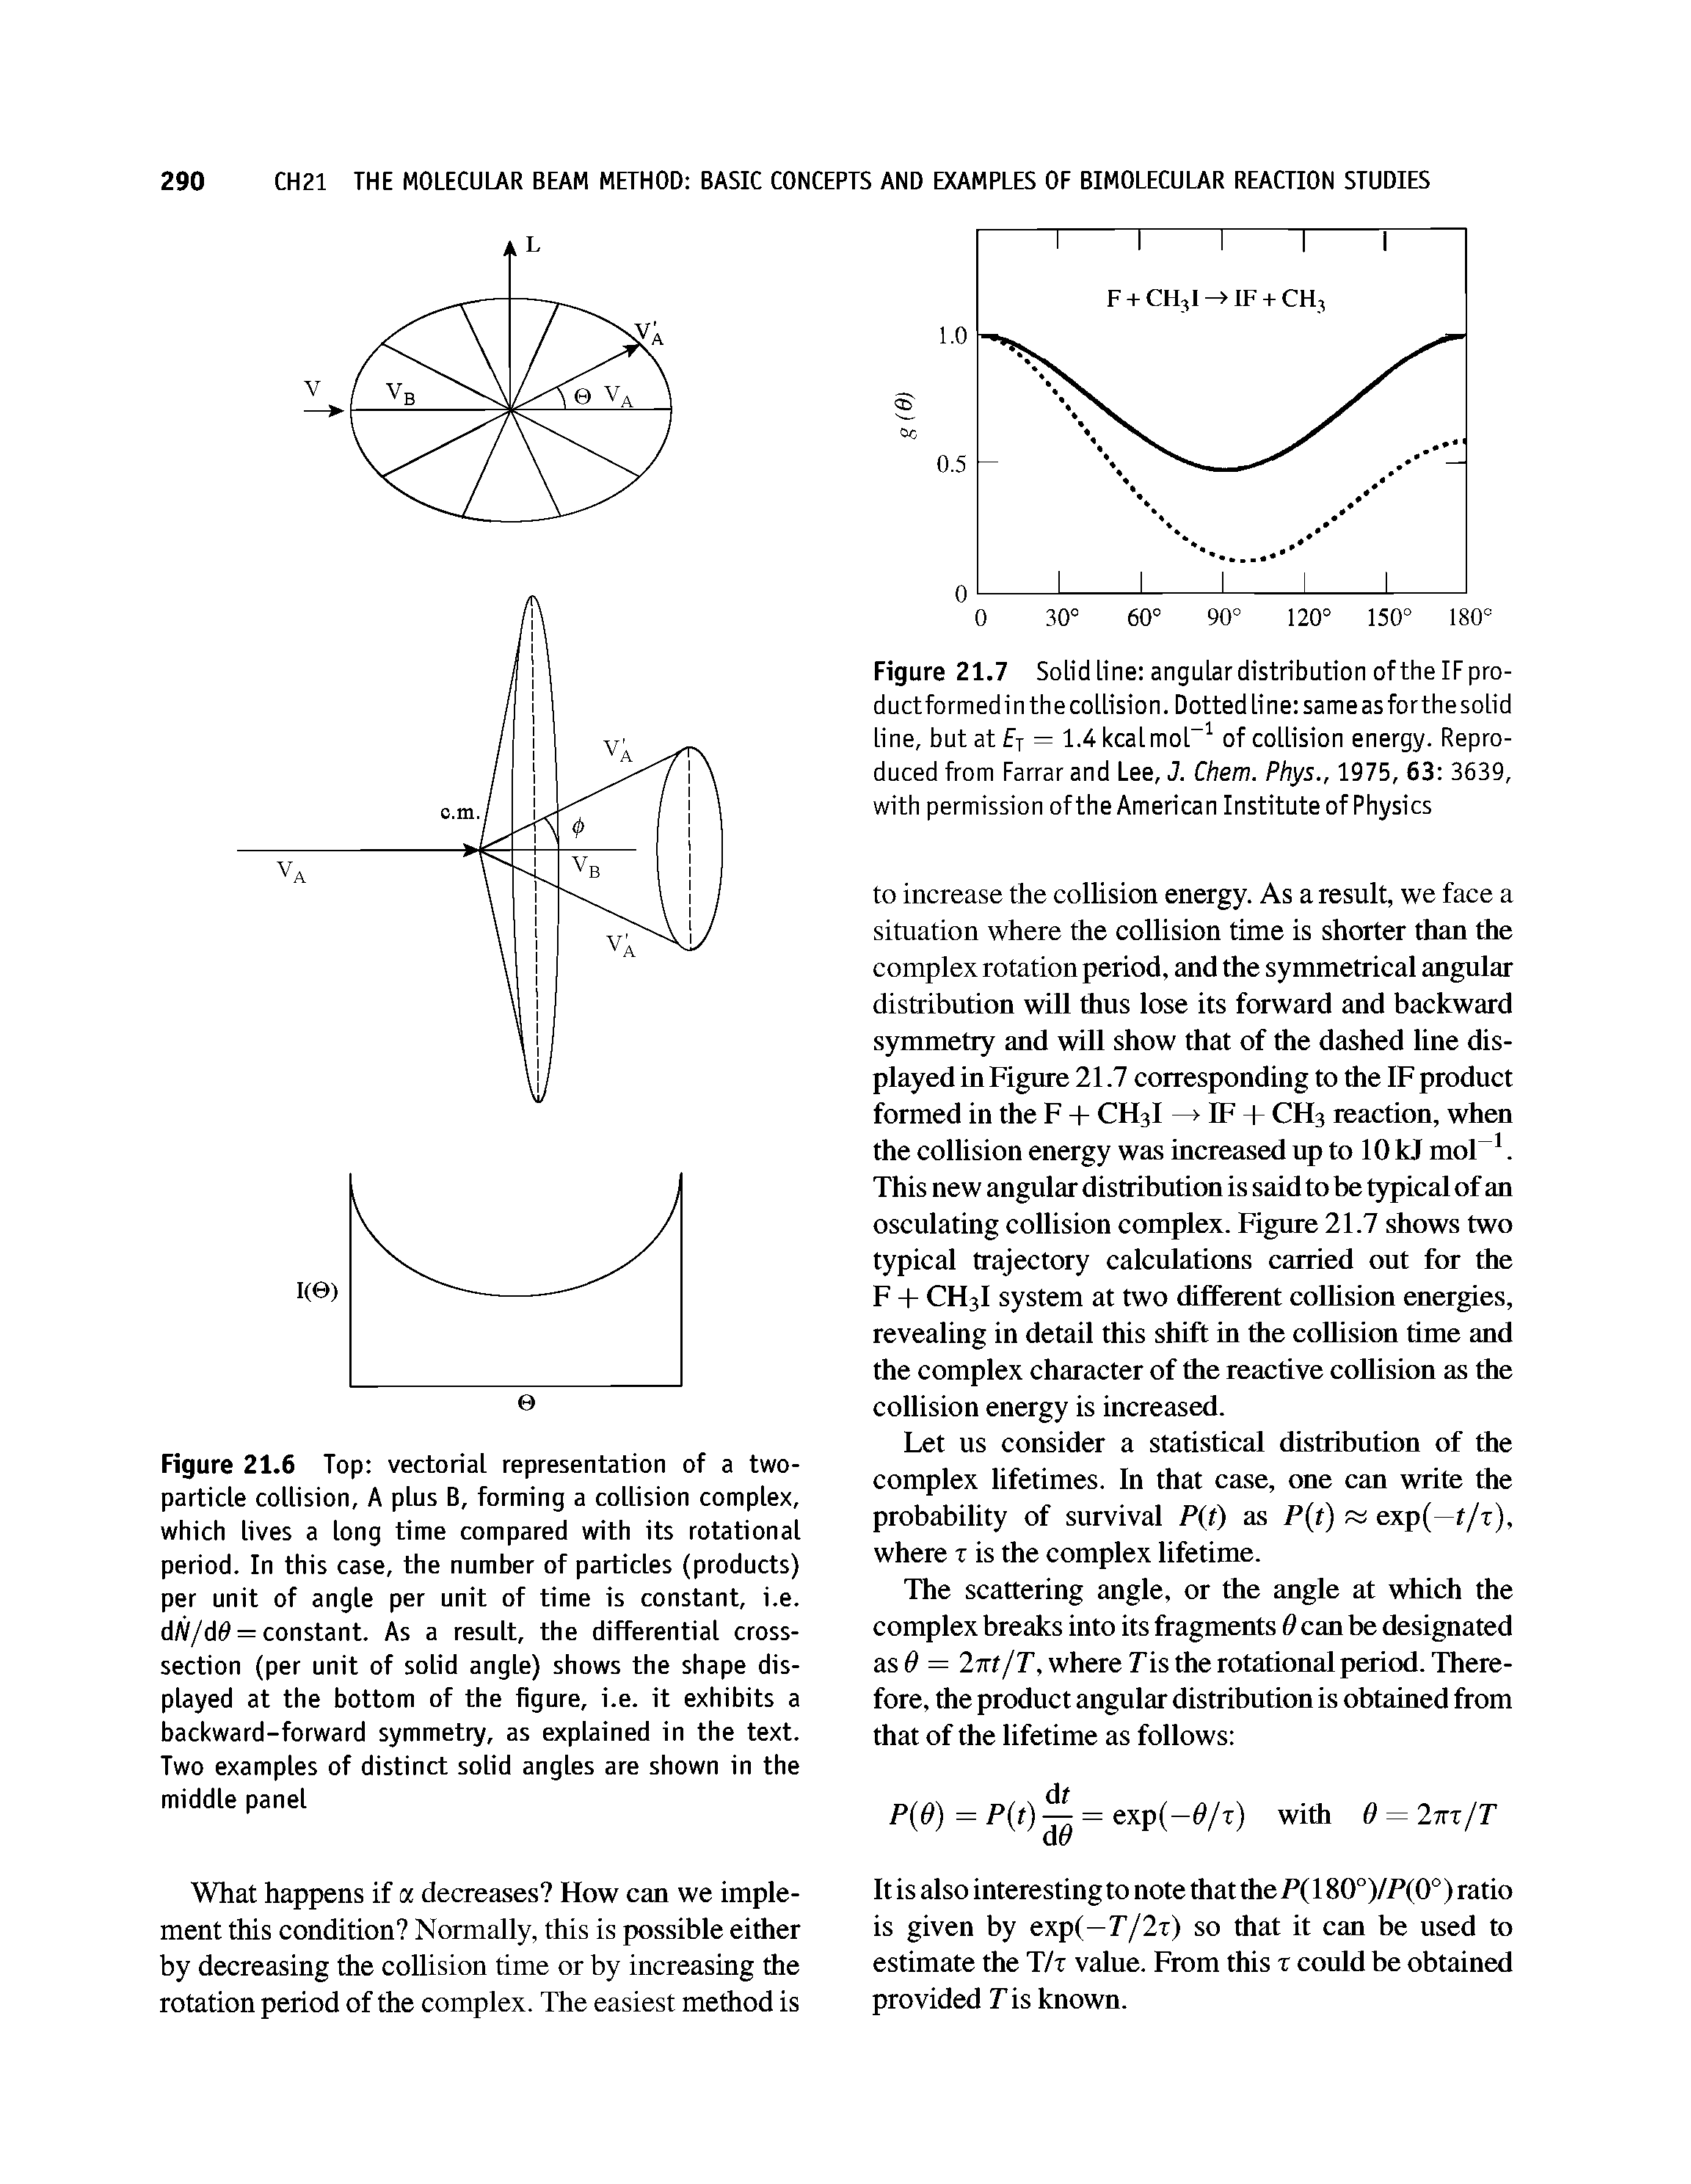 Figure 21.6 Top vectorial representation of a two-particle collision, A plus B, forming a collision complex, which lives a long time compared with its rotational period. In this case, the number of particles (products) per unit of angle per unit of time is constant, i.e. d/V/d0 = constant. As a result, the differential cross-section (per unit of solid angle) shows the shape displayed at the bottom of the figure, i.e. it exhibits a backward-forward symmetry, as explained in the text. Two examples of distinct solid angles are shown in the middle panel...